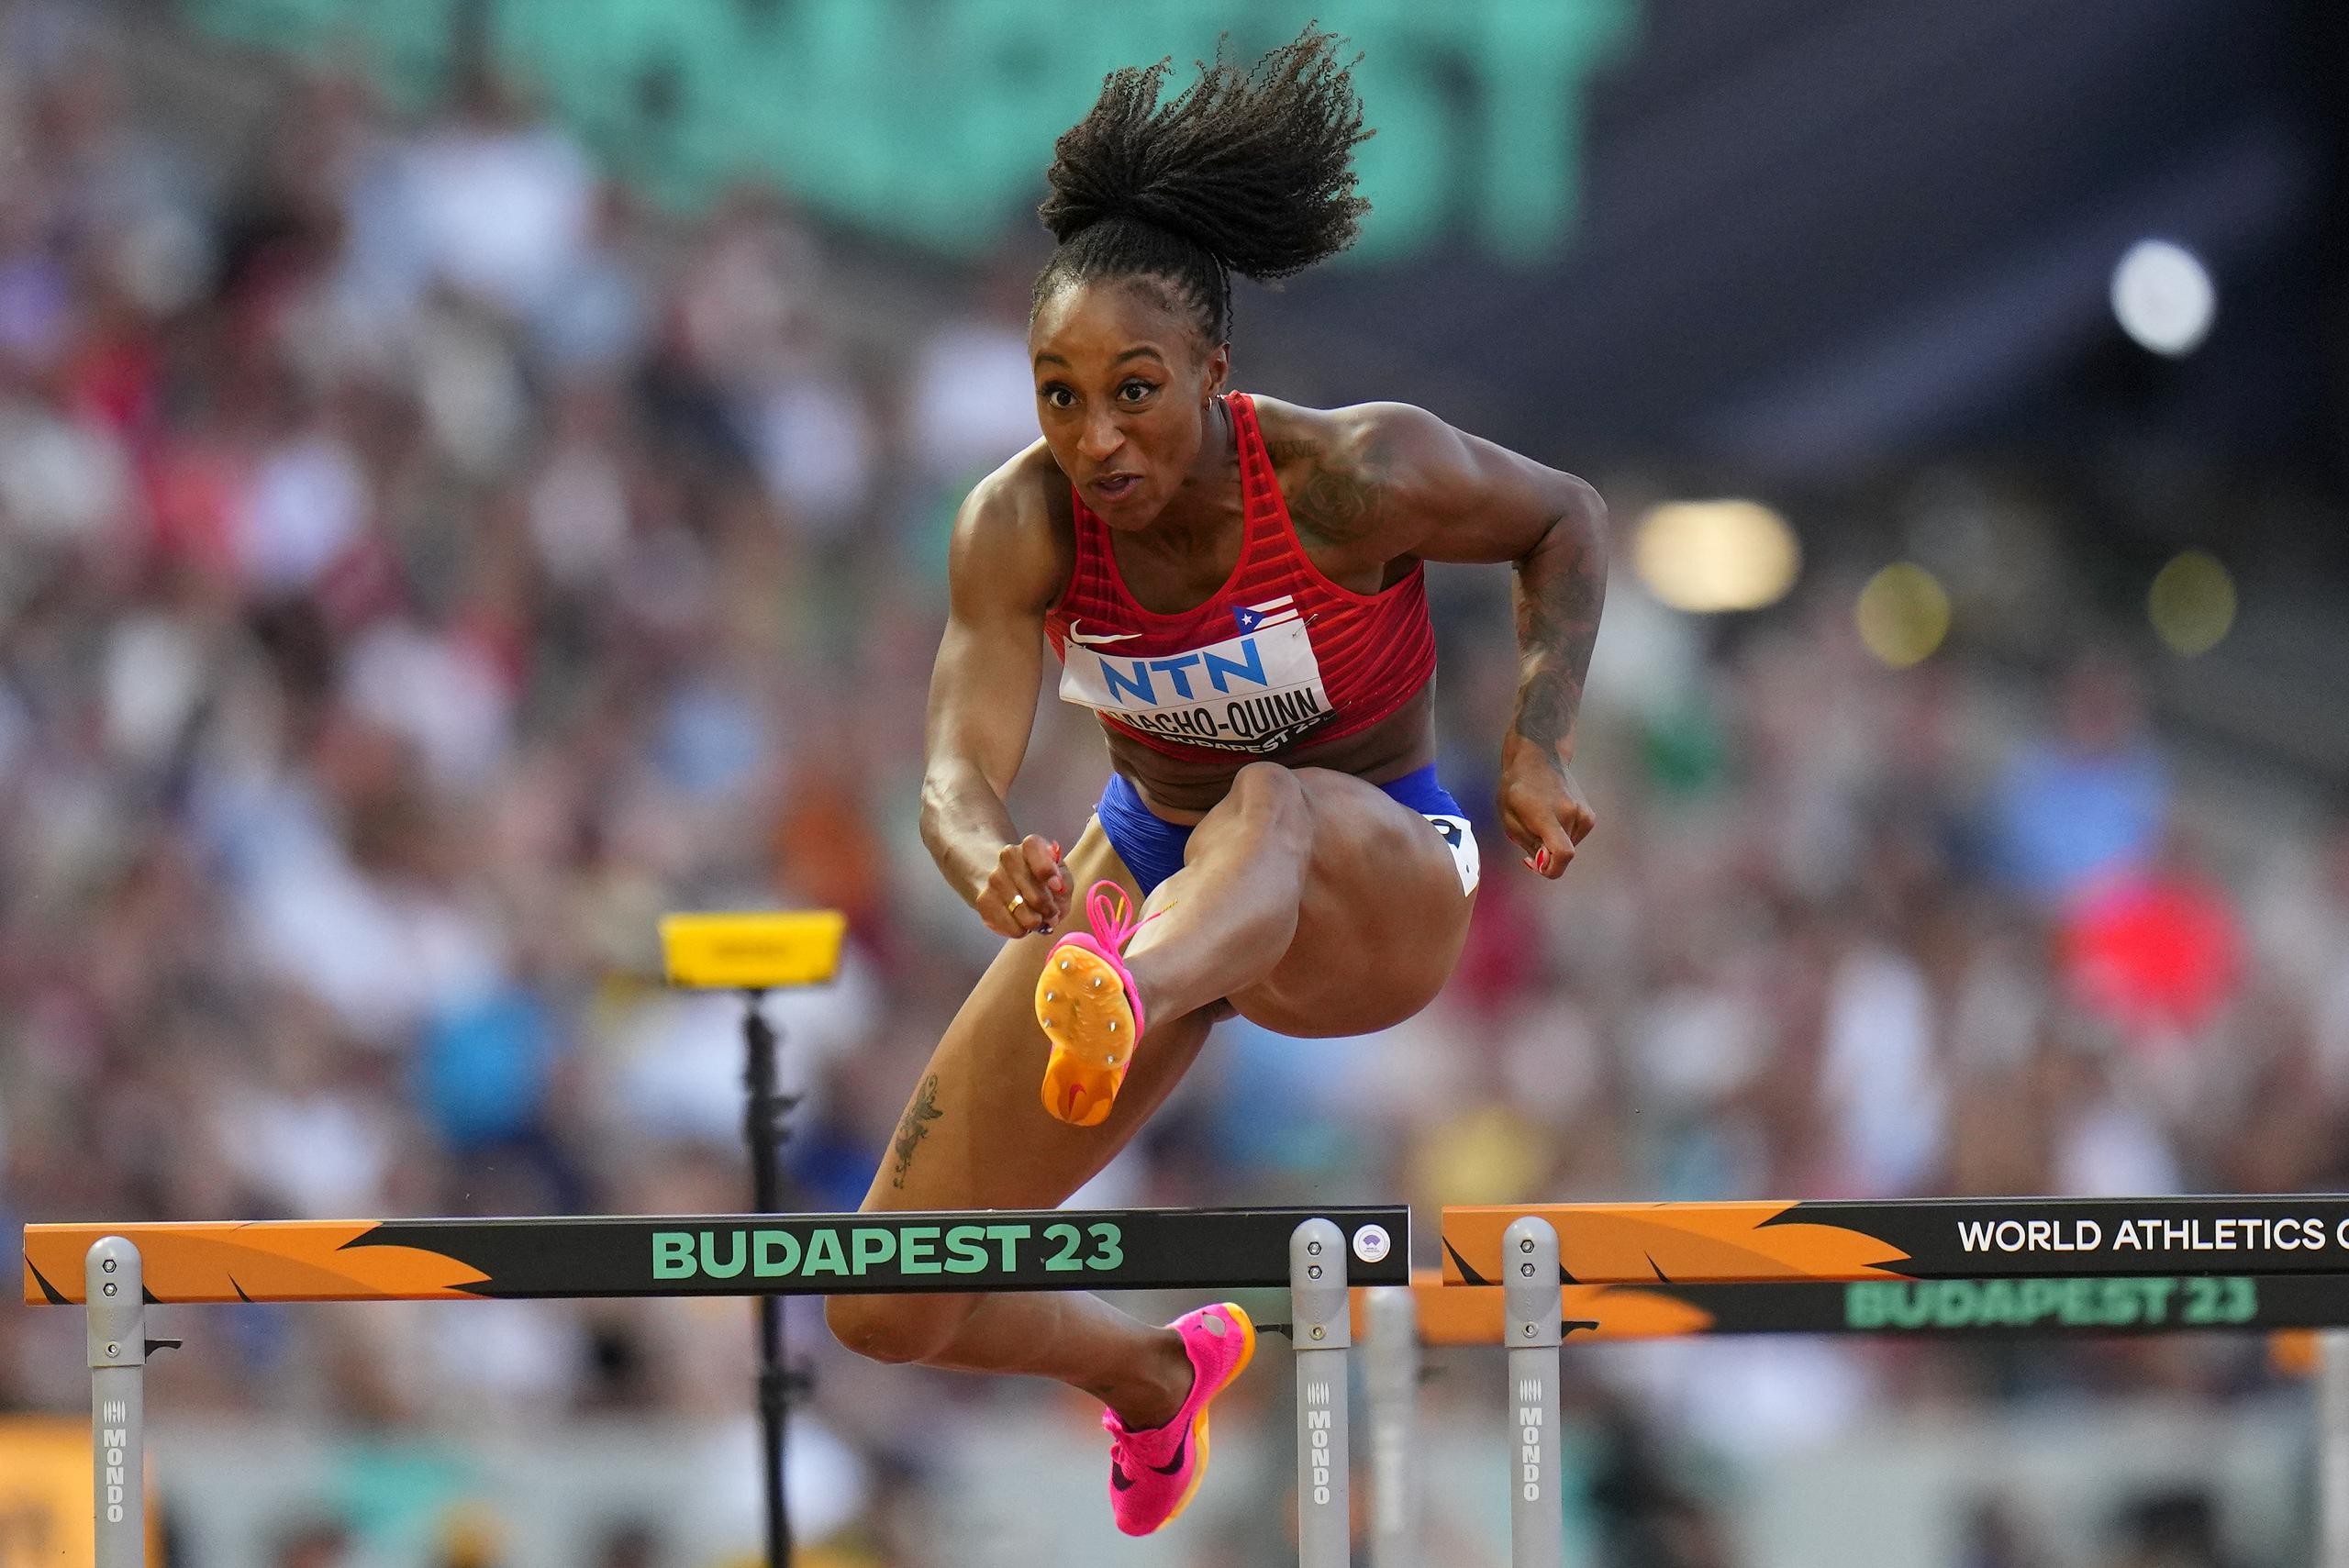 Jasmine Camacho-Quinn, of Puerto Rico competes in a Women's 100-meters hurdles heat during the World Athletics Championships in Budapest, Hungary, Tuesday, Aug. 22, 2023. (AP Photo/Petr David Josek)